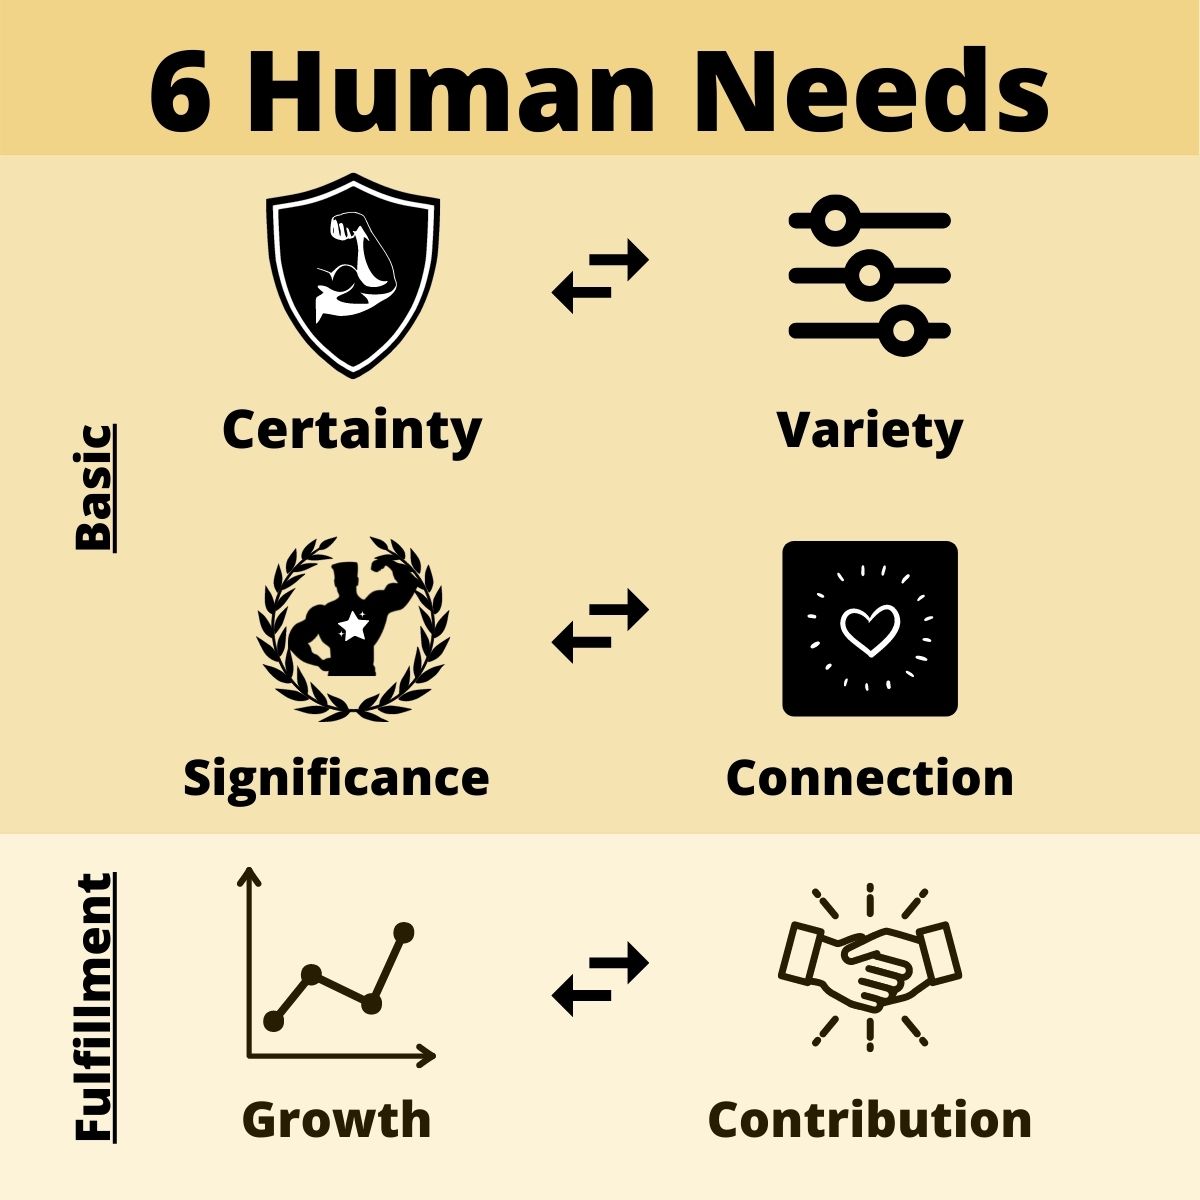 6 human needs: a guide for our conscious community for legacy builders